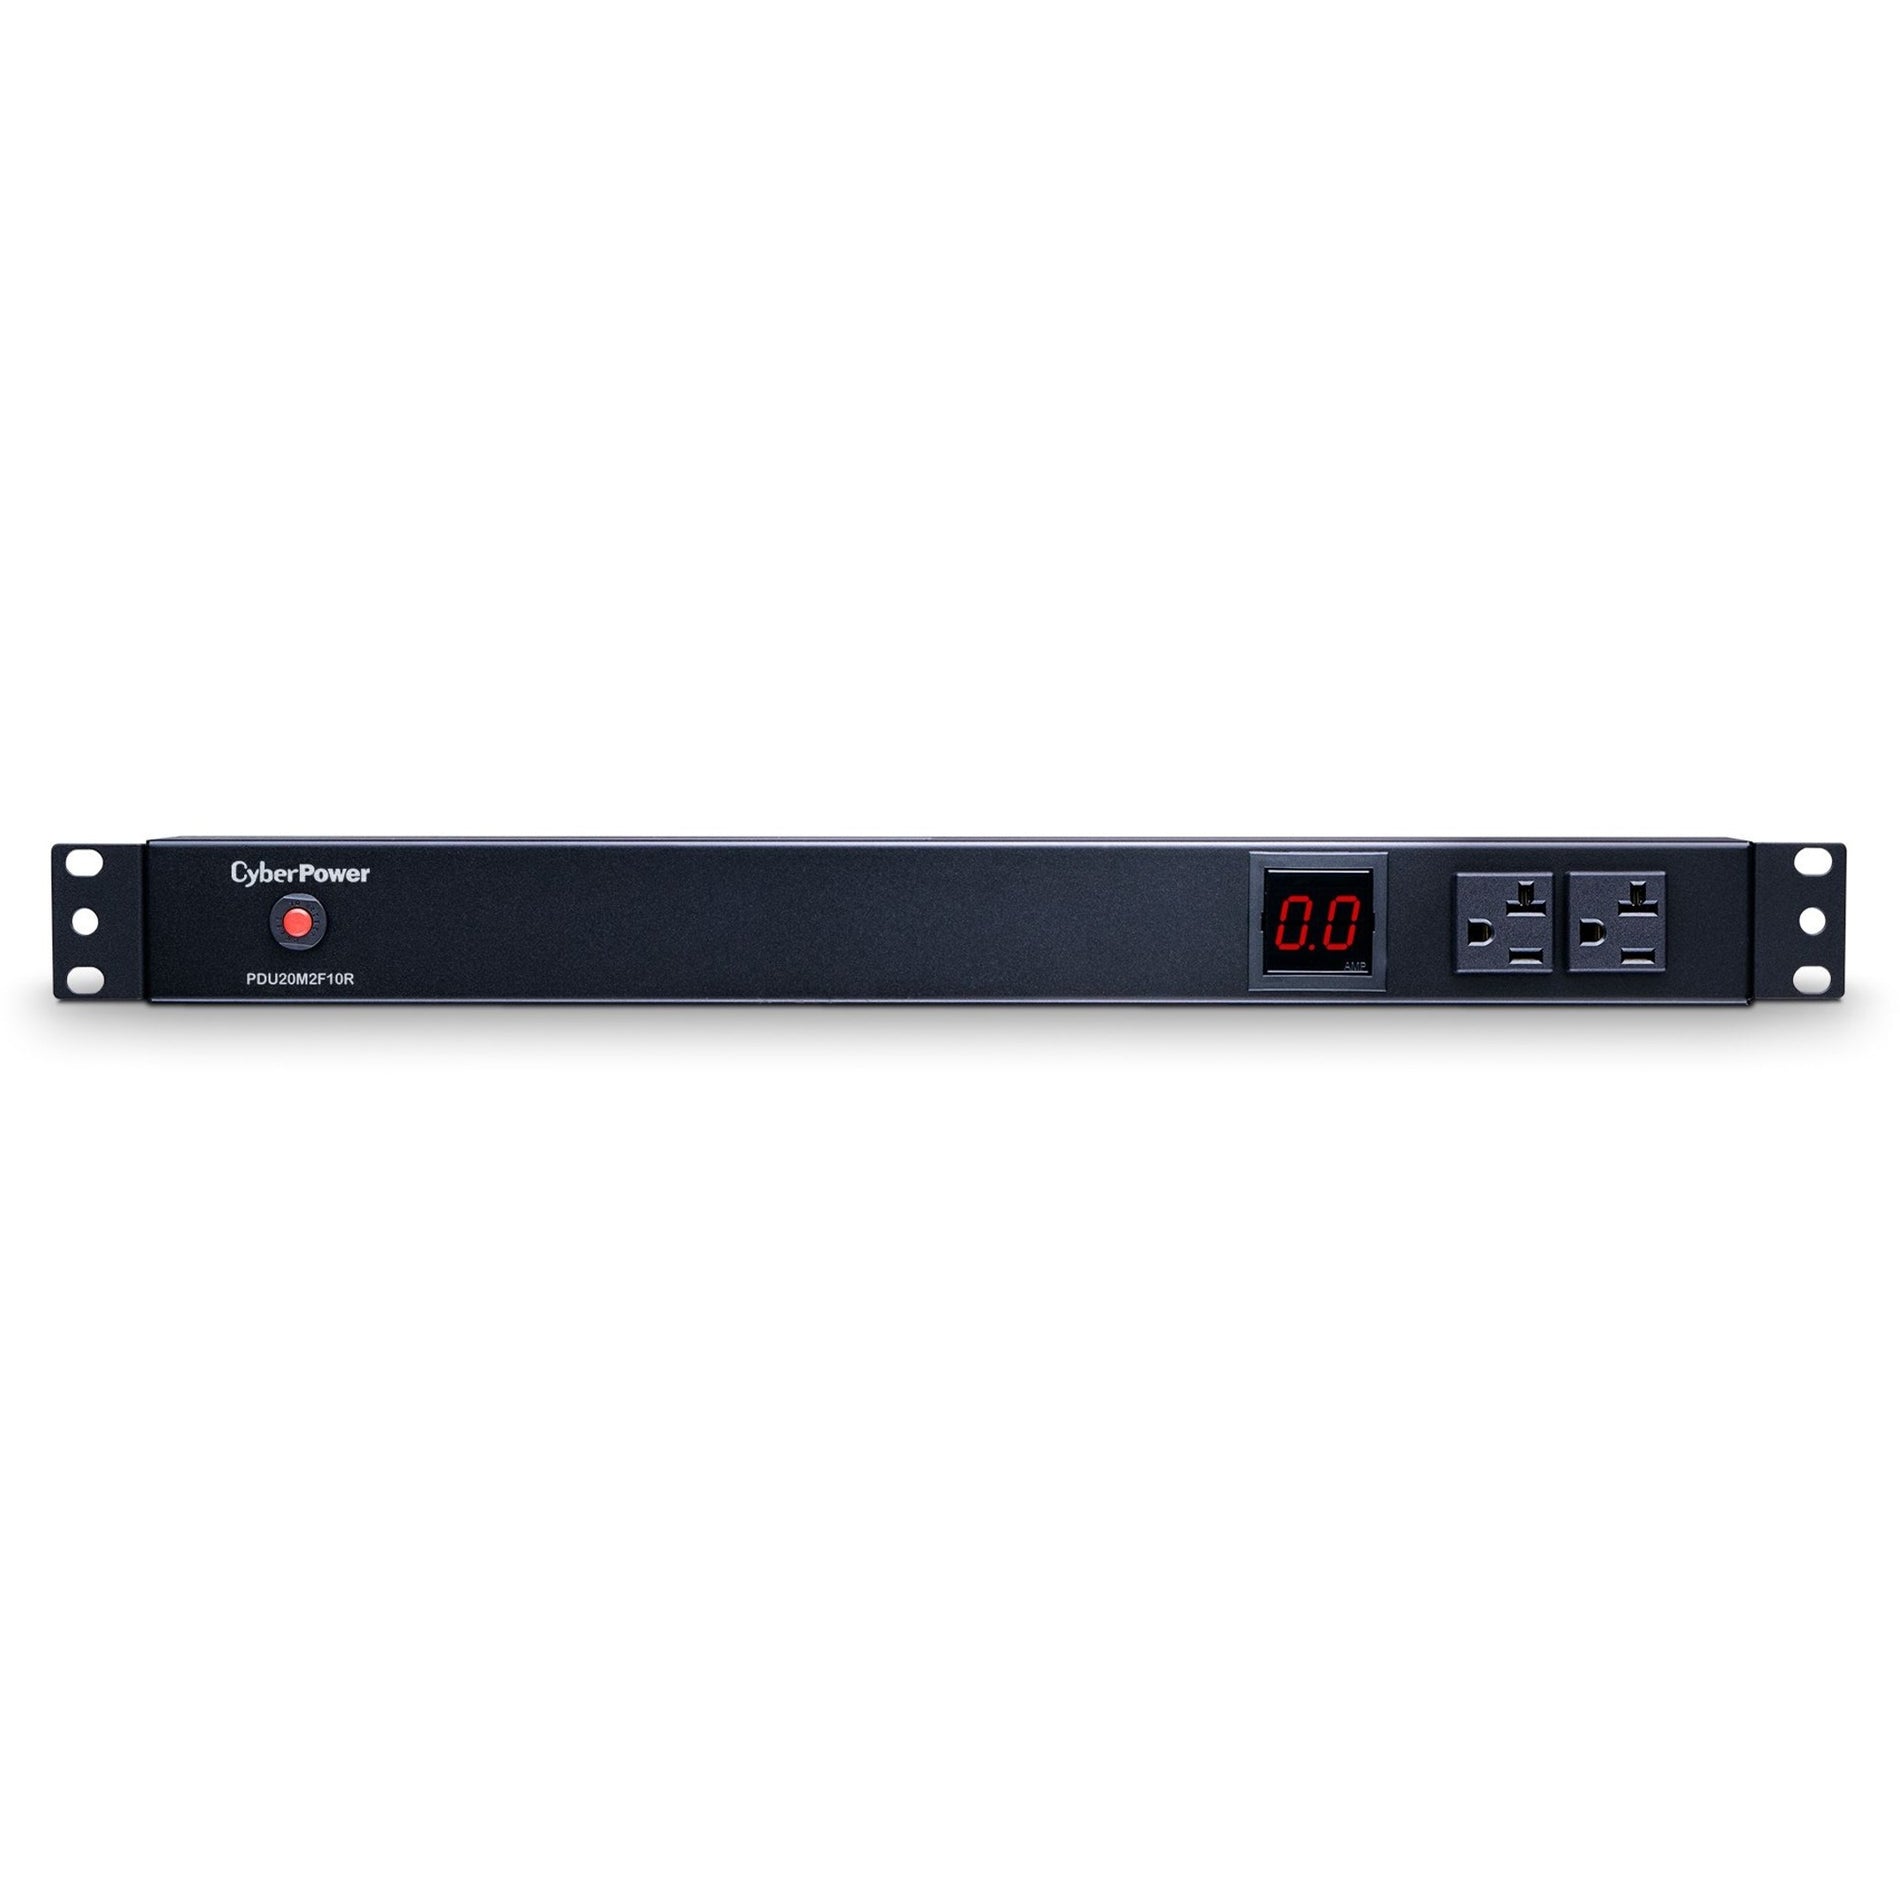 サイバーパワー PDU20M2F10R メータード PDU、単相 100-125VAC 20A、12 個のコンセント CyberPower - サイバーパワー